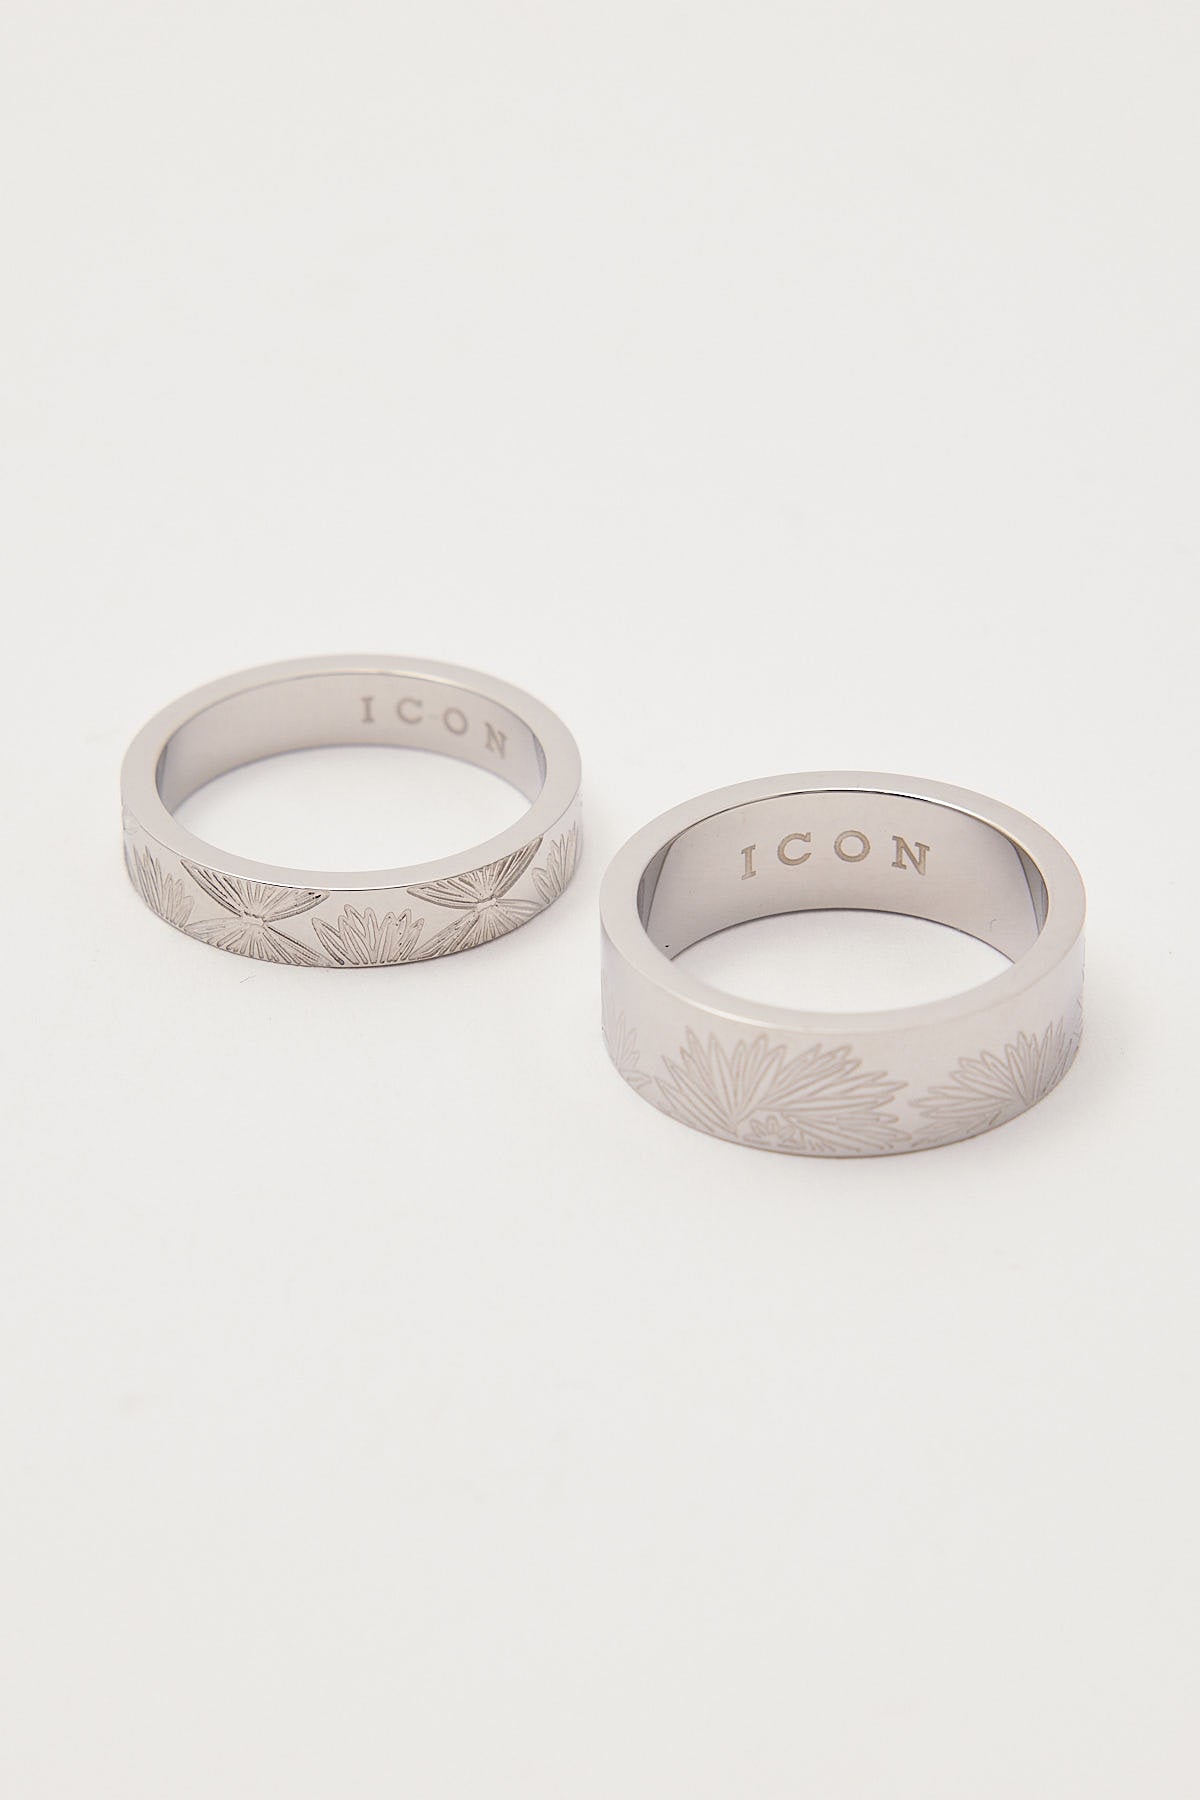 Icon Brand Hylas Ring Set Stainless Steel Silver